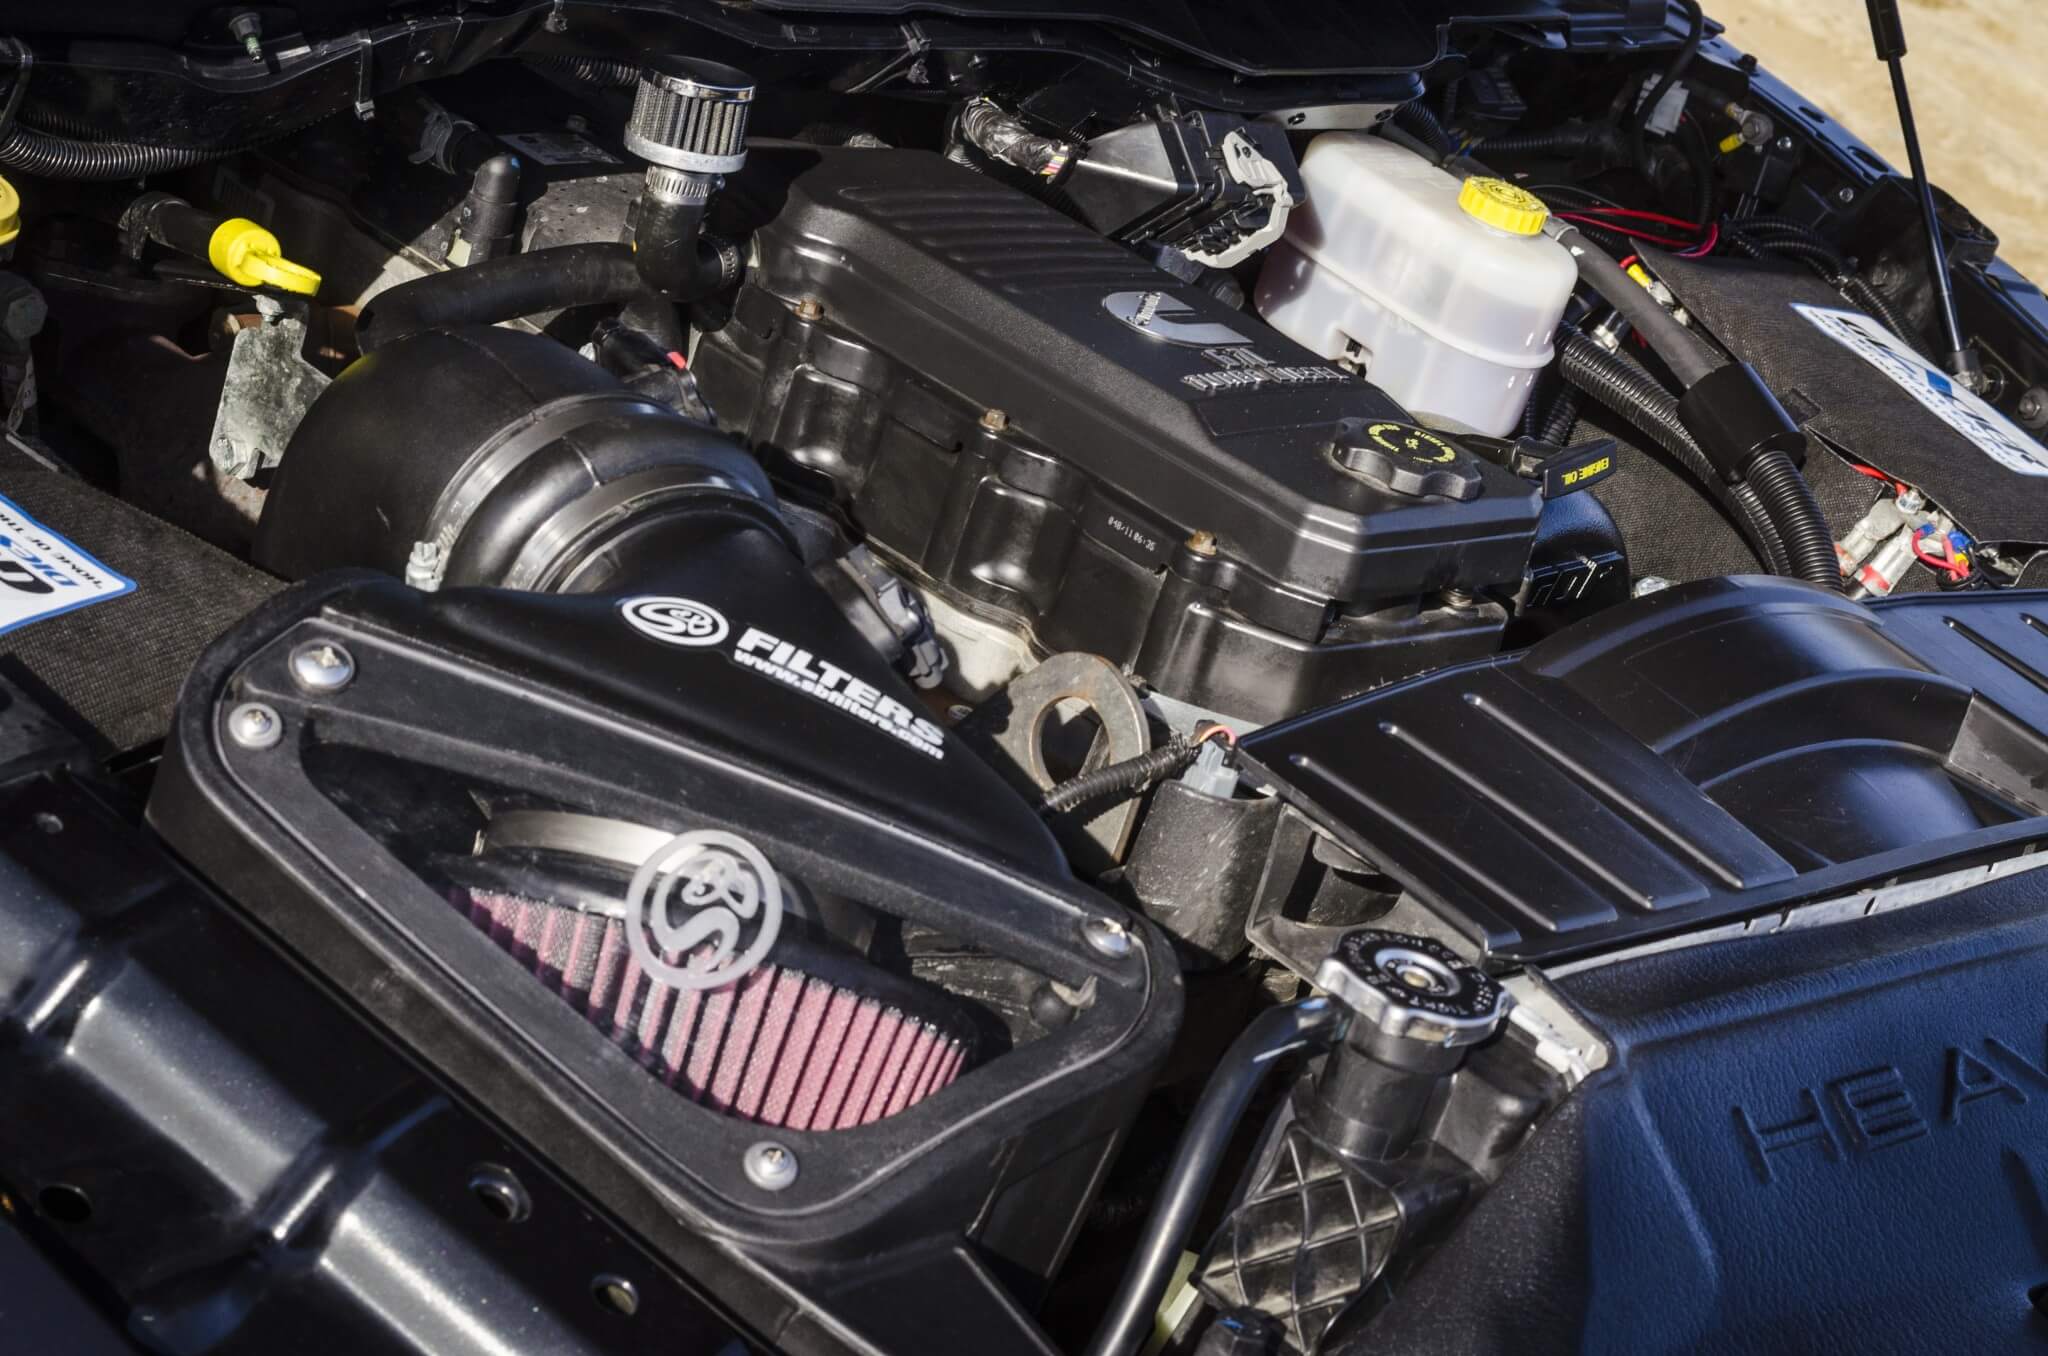 An S&B cold air intake with the scoop kit makes sure only clean air gets into the 6.7L Cummins engine. Jordan uses F-Bomb fuel additive.